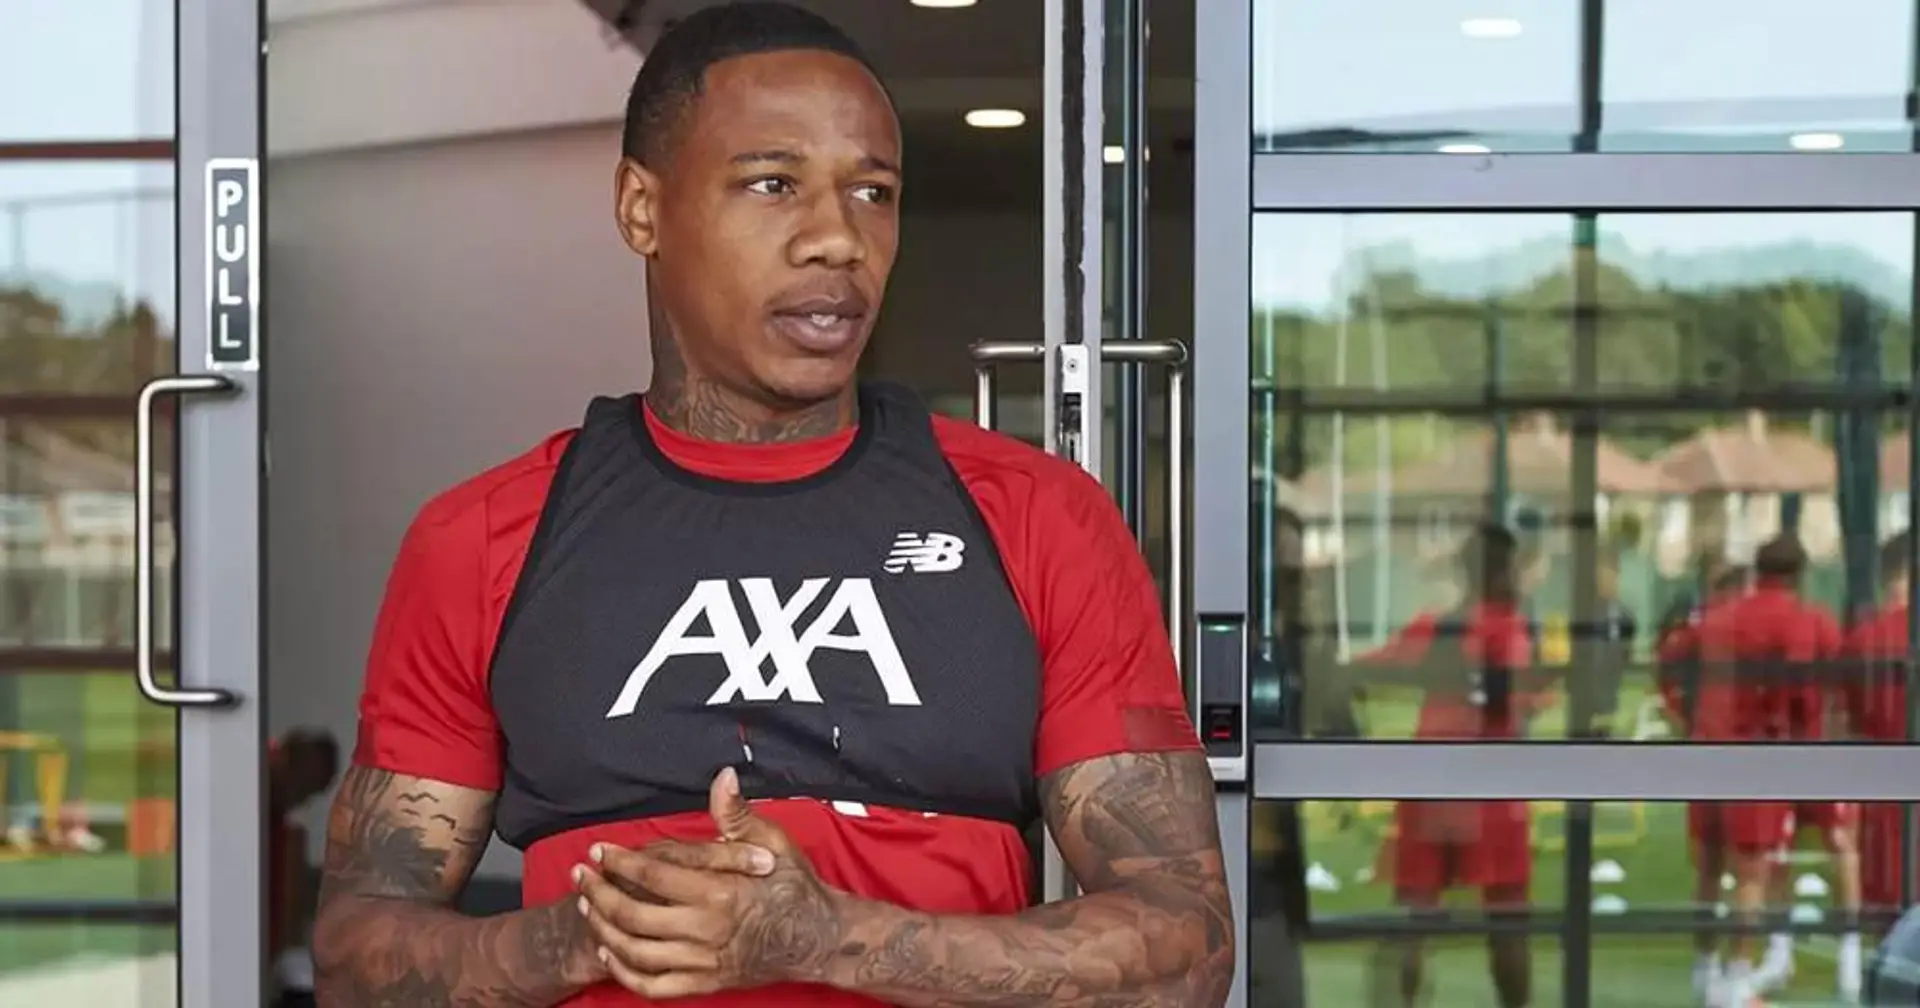 He was class, now he's collecting dust: former PL star urges Clyne to rediscover form away from Anfield